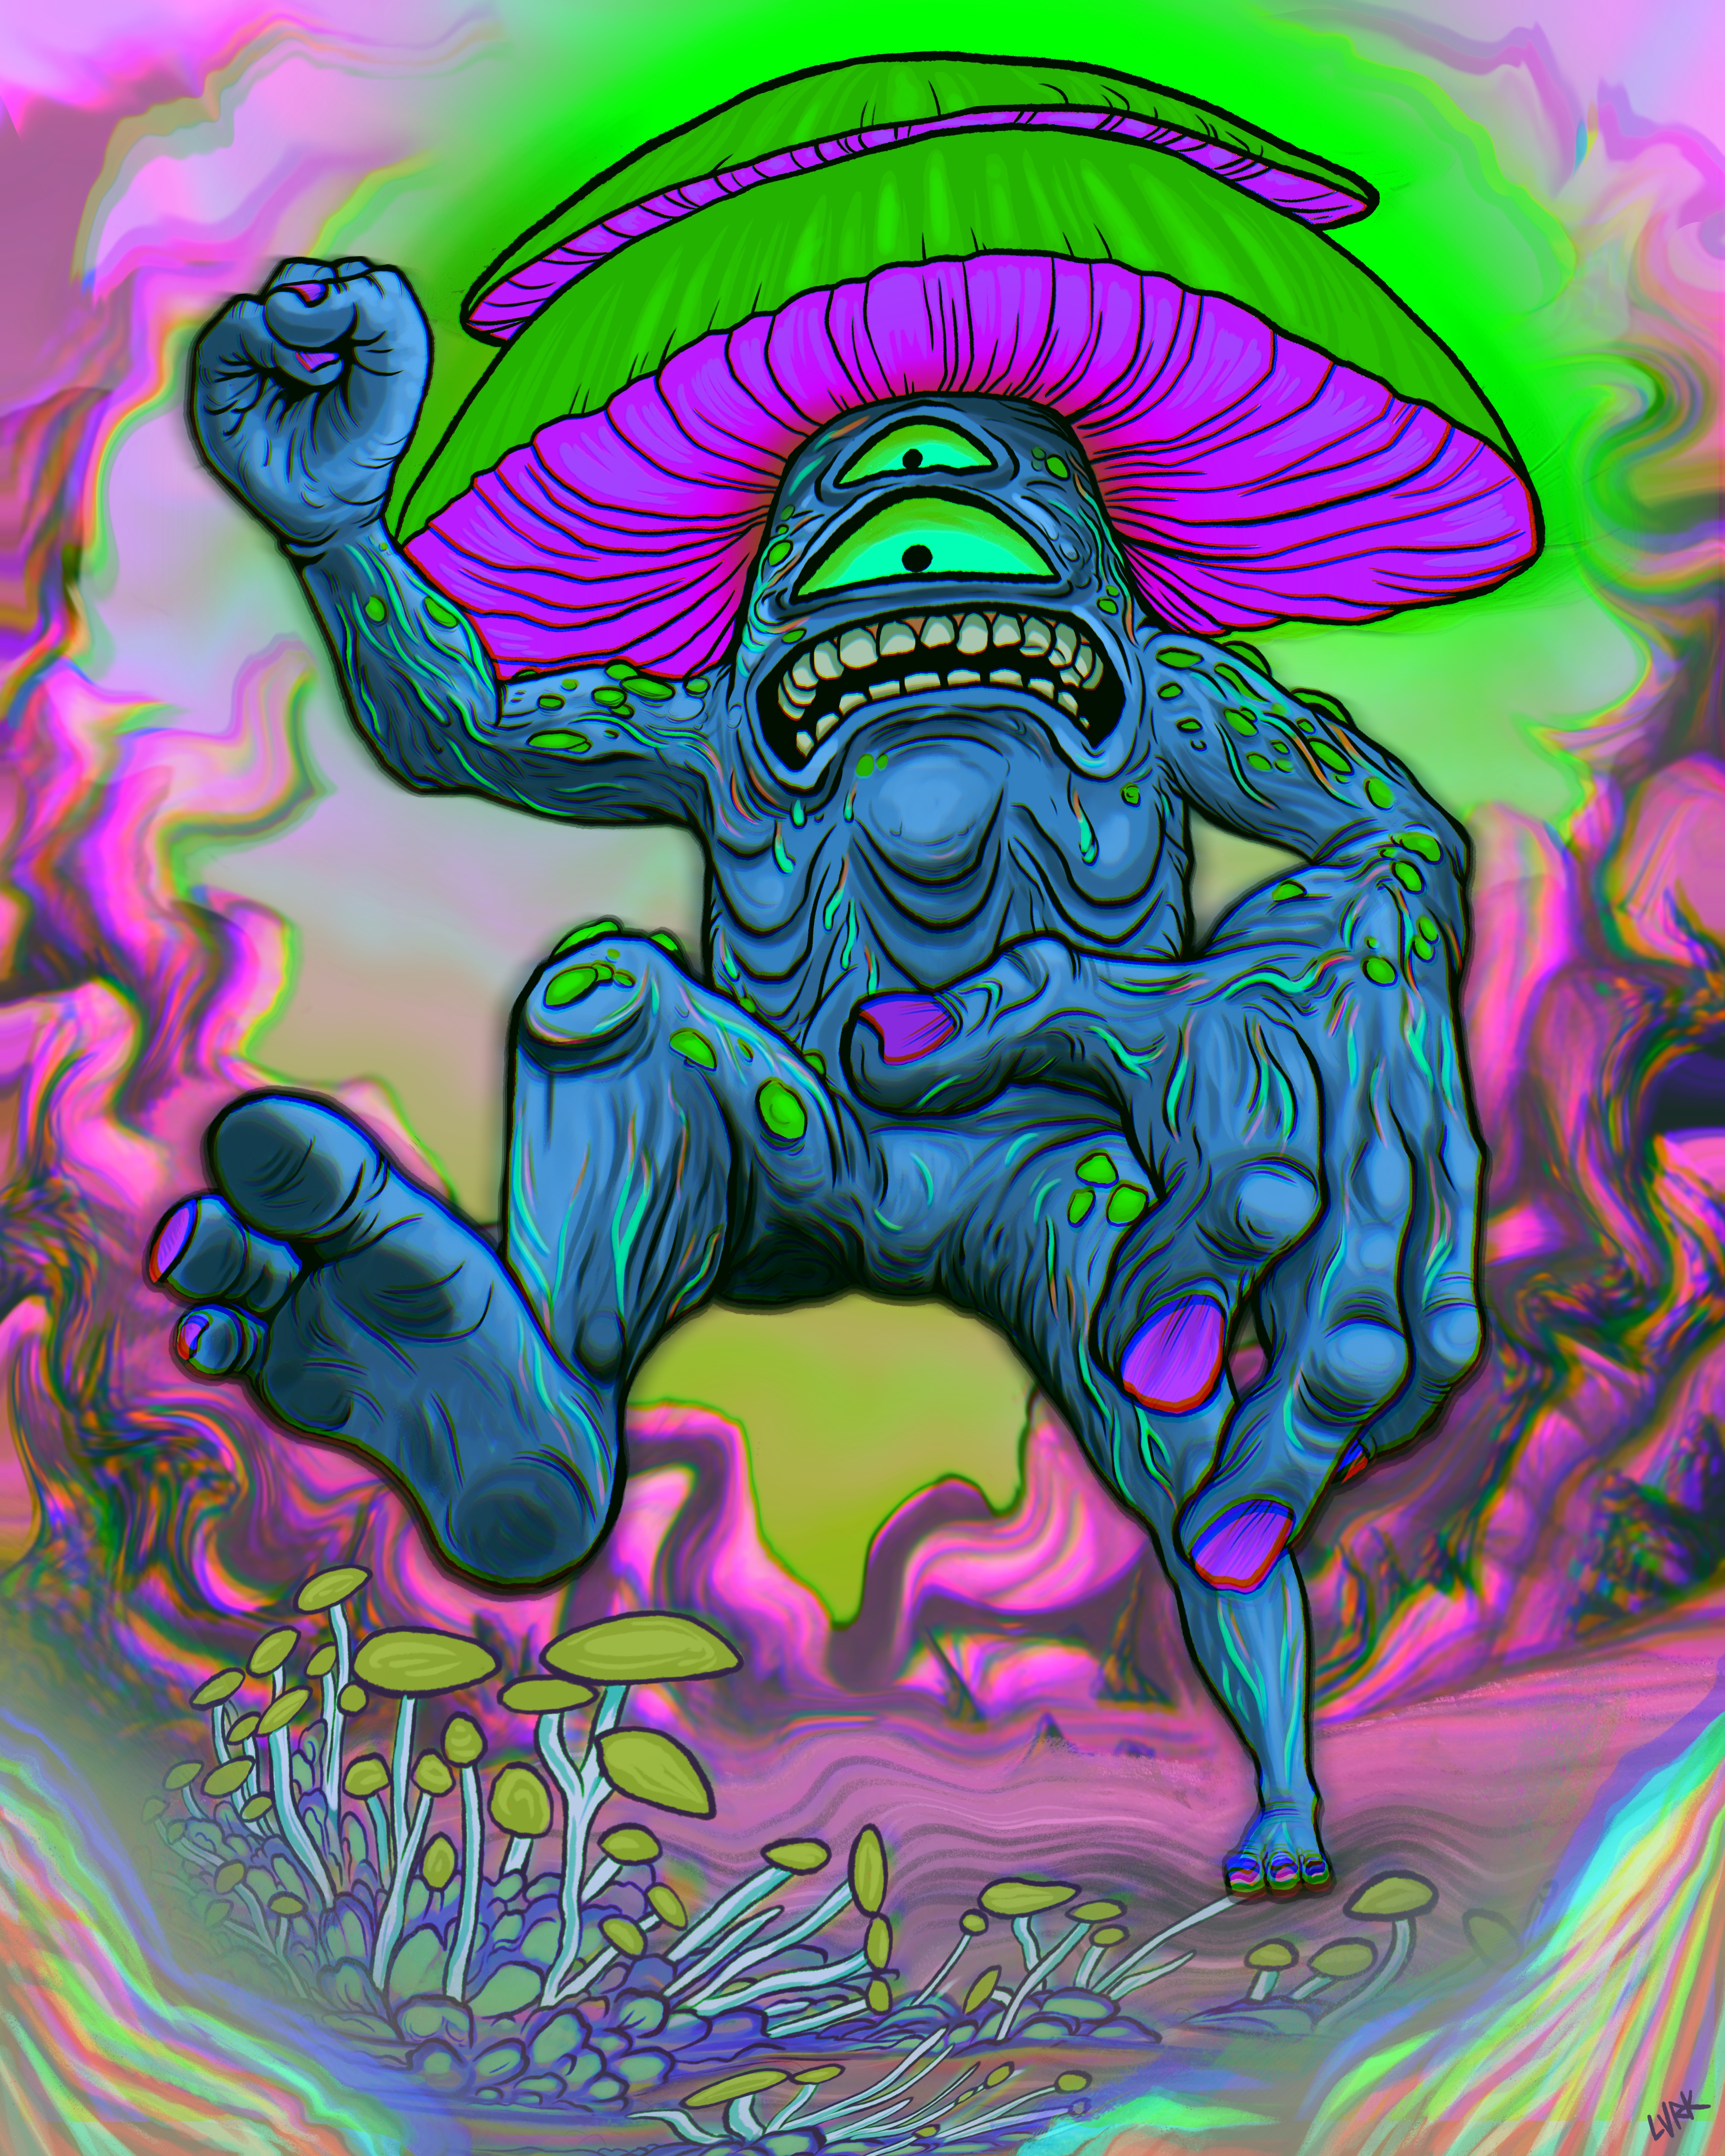 Melting and Tripping